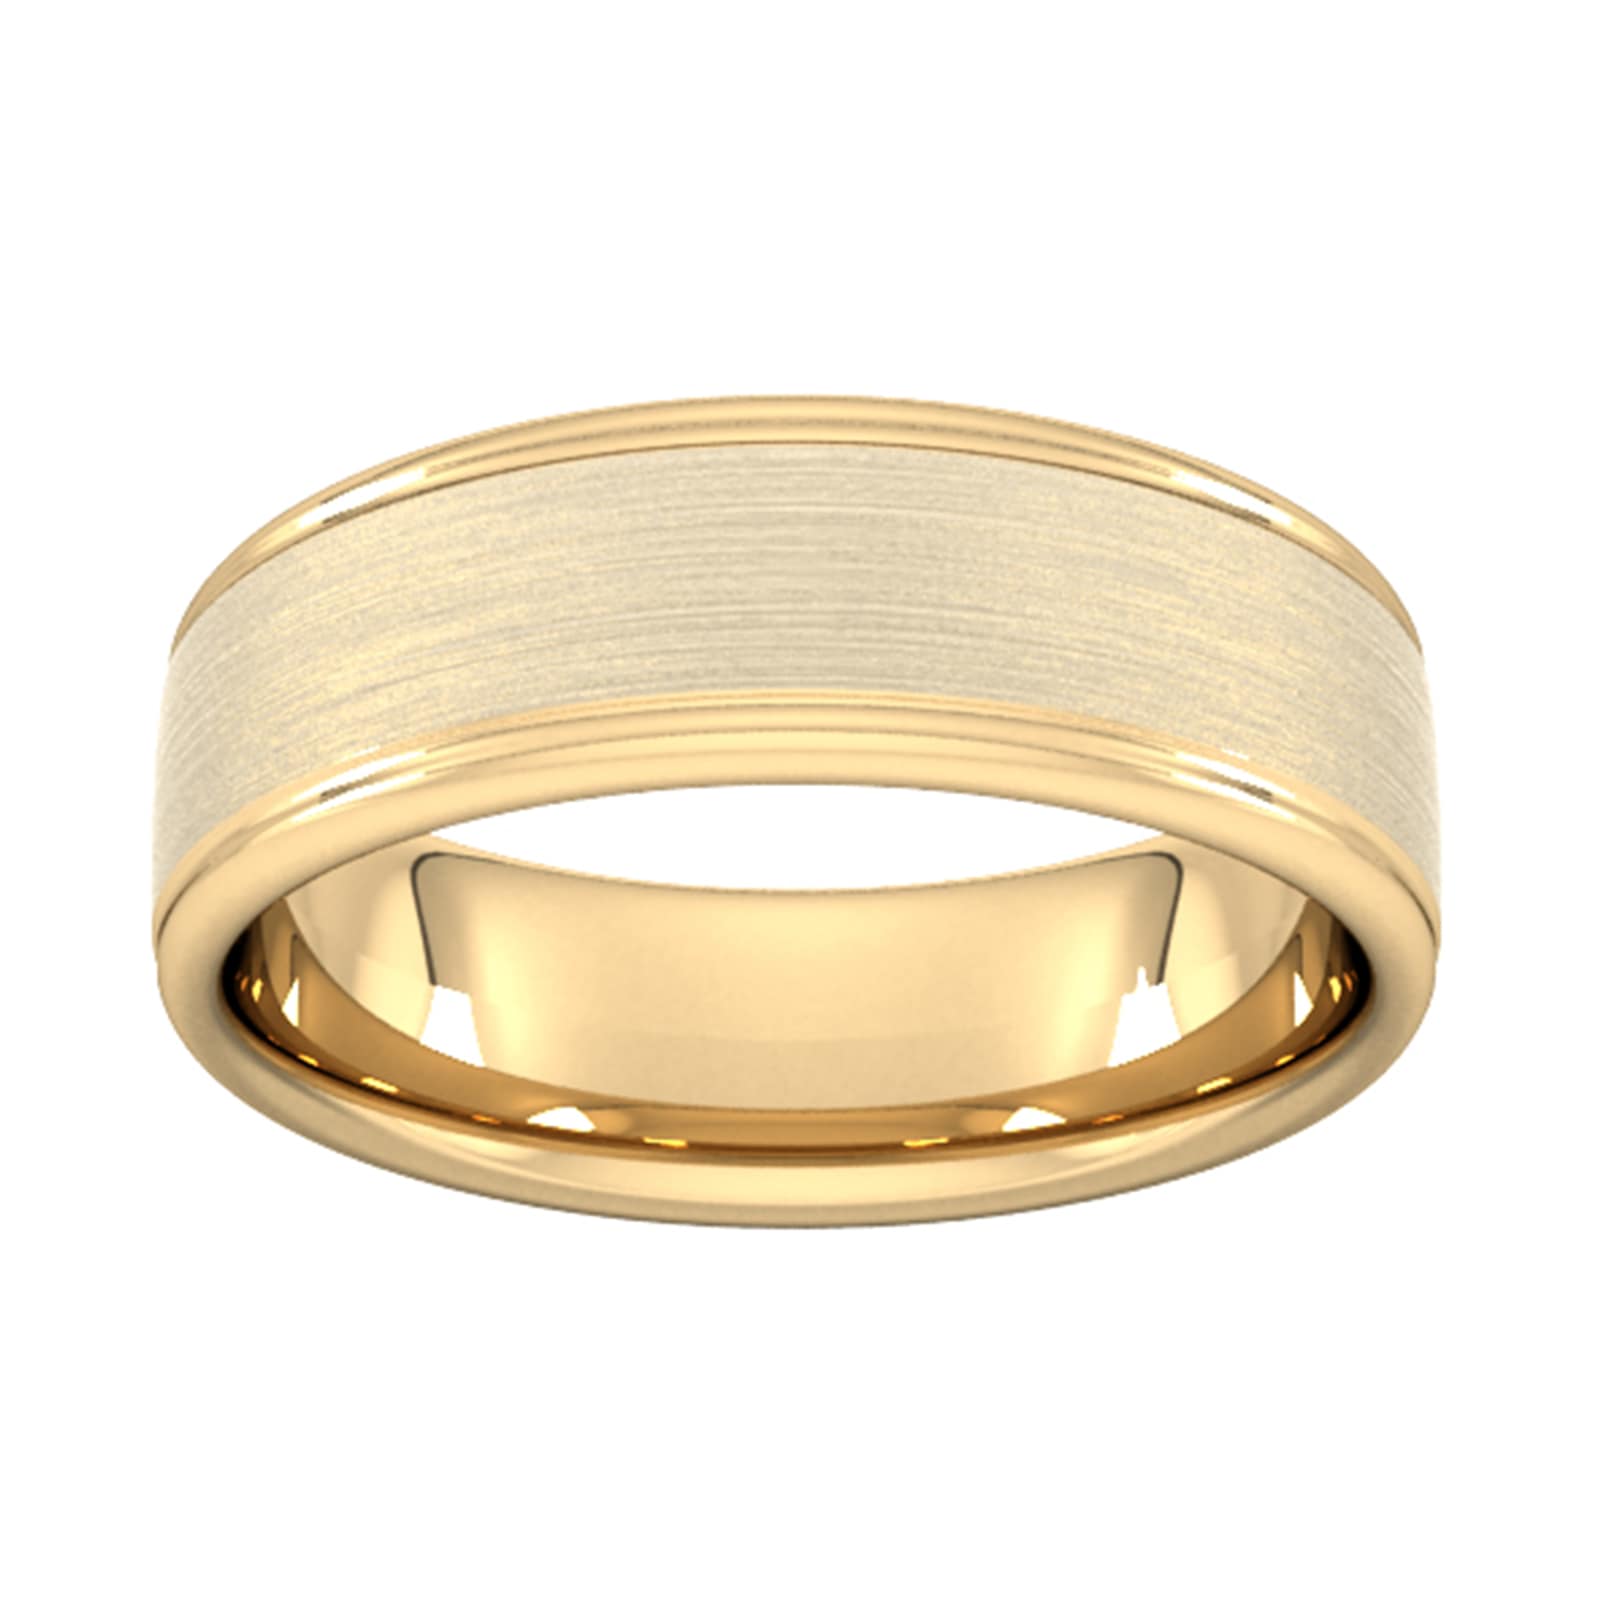 7mm Slight Court Standard Matt Centre With Grooves Wedding Ring In 18 Carat Yellow Gold - Ring Size L